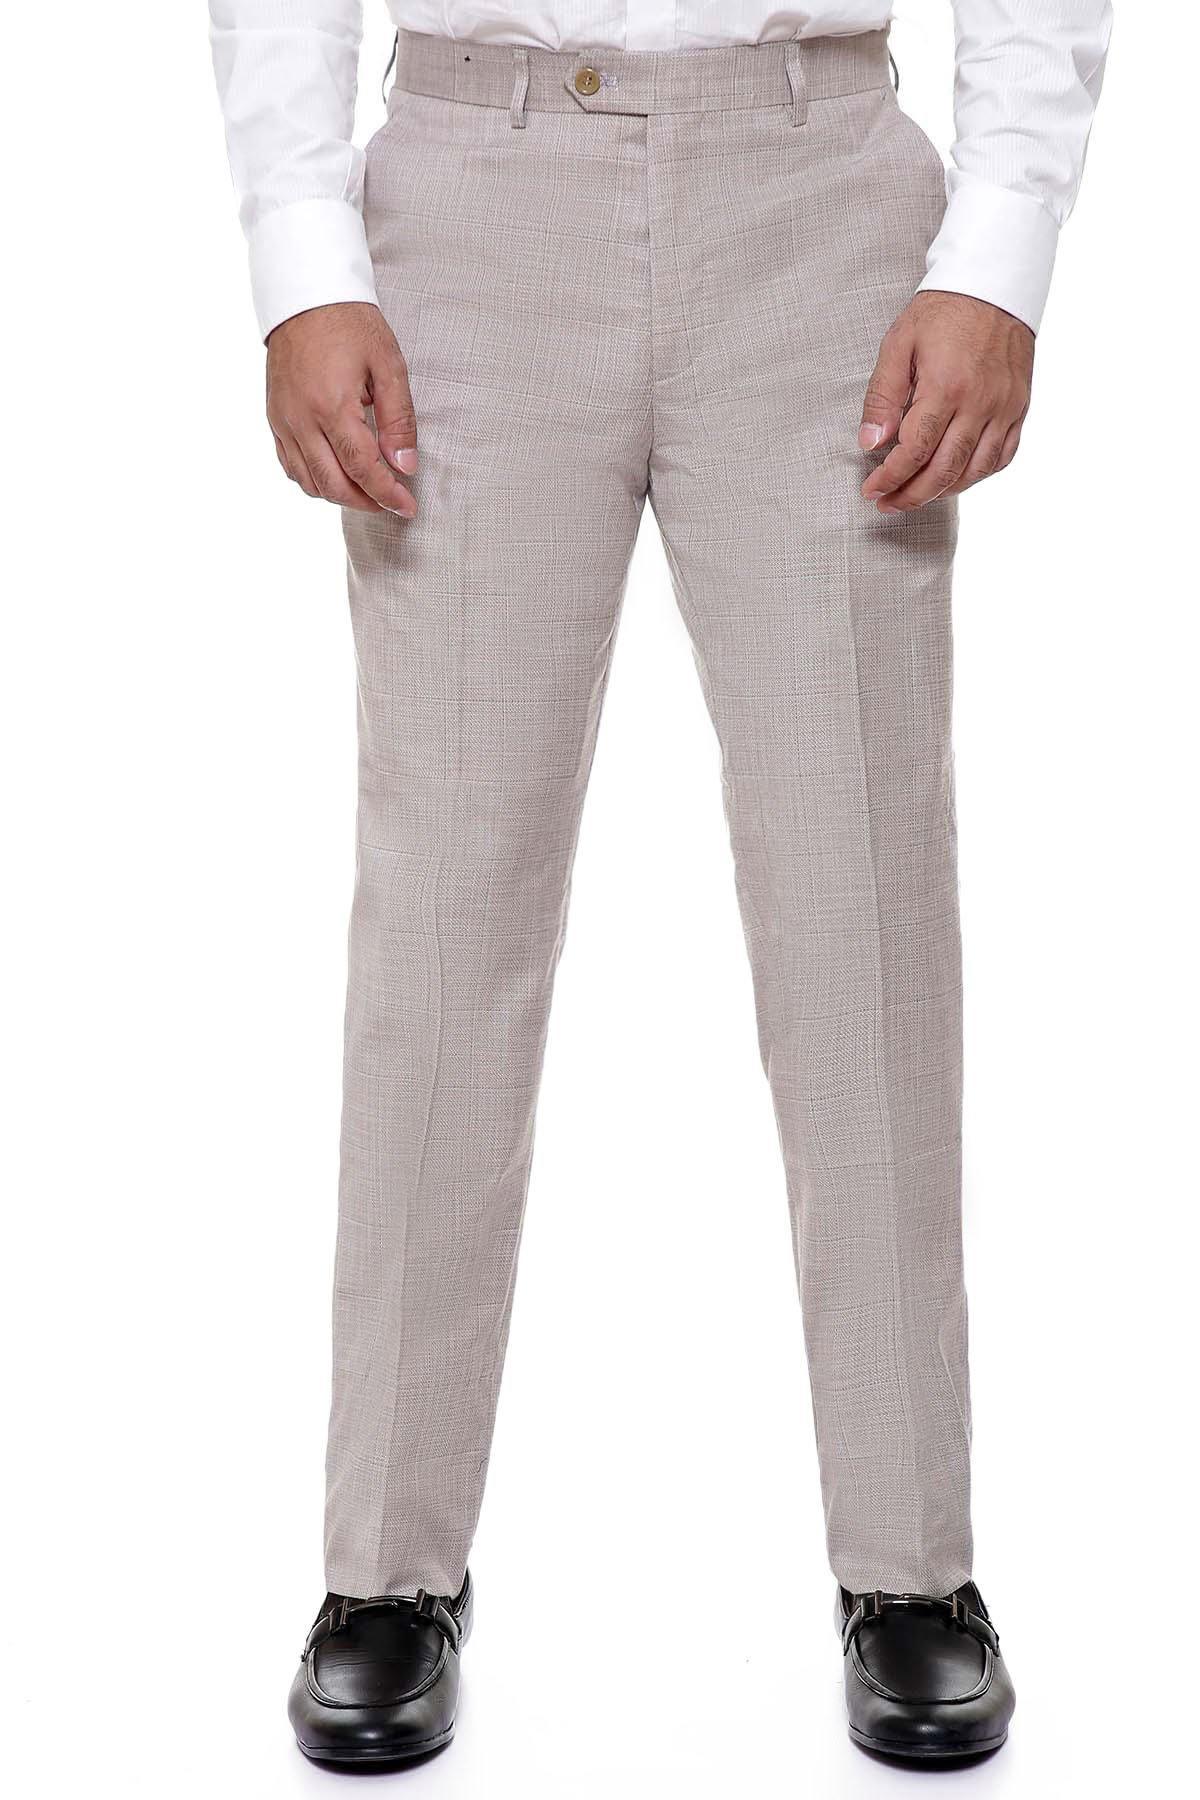 Dress Pant Smart fit Light Brown at Charcoal Clothing